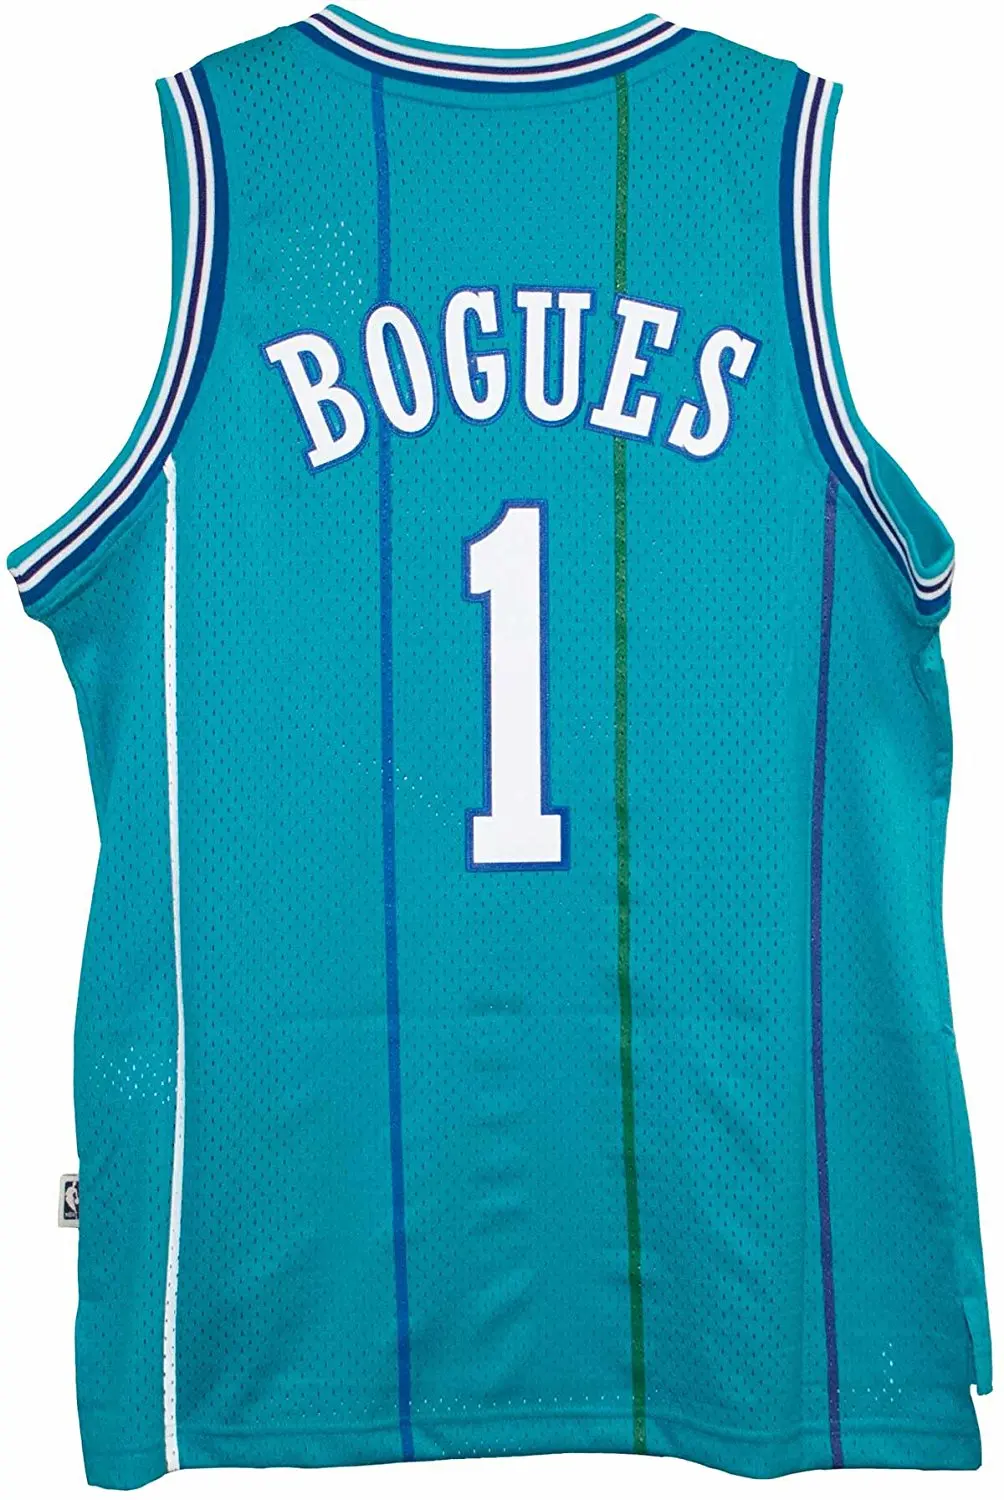 muggsy bogues hornets jersey